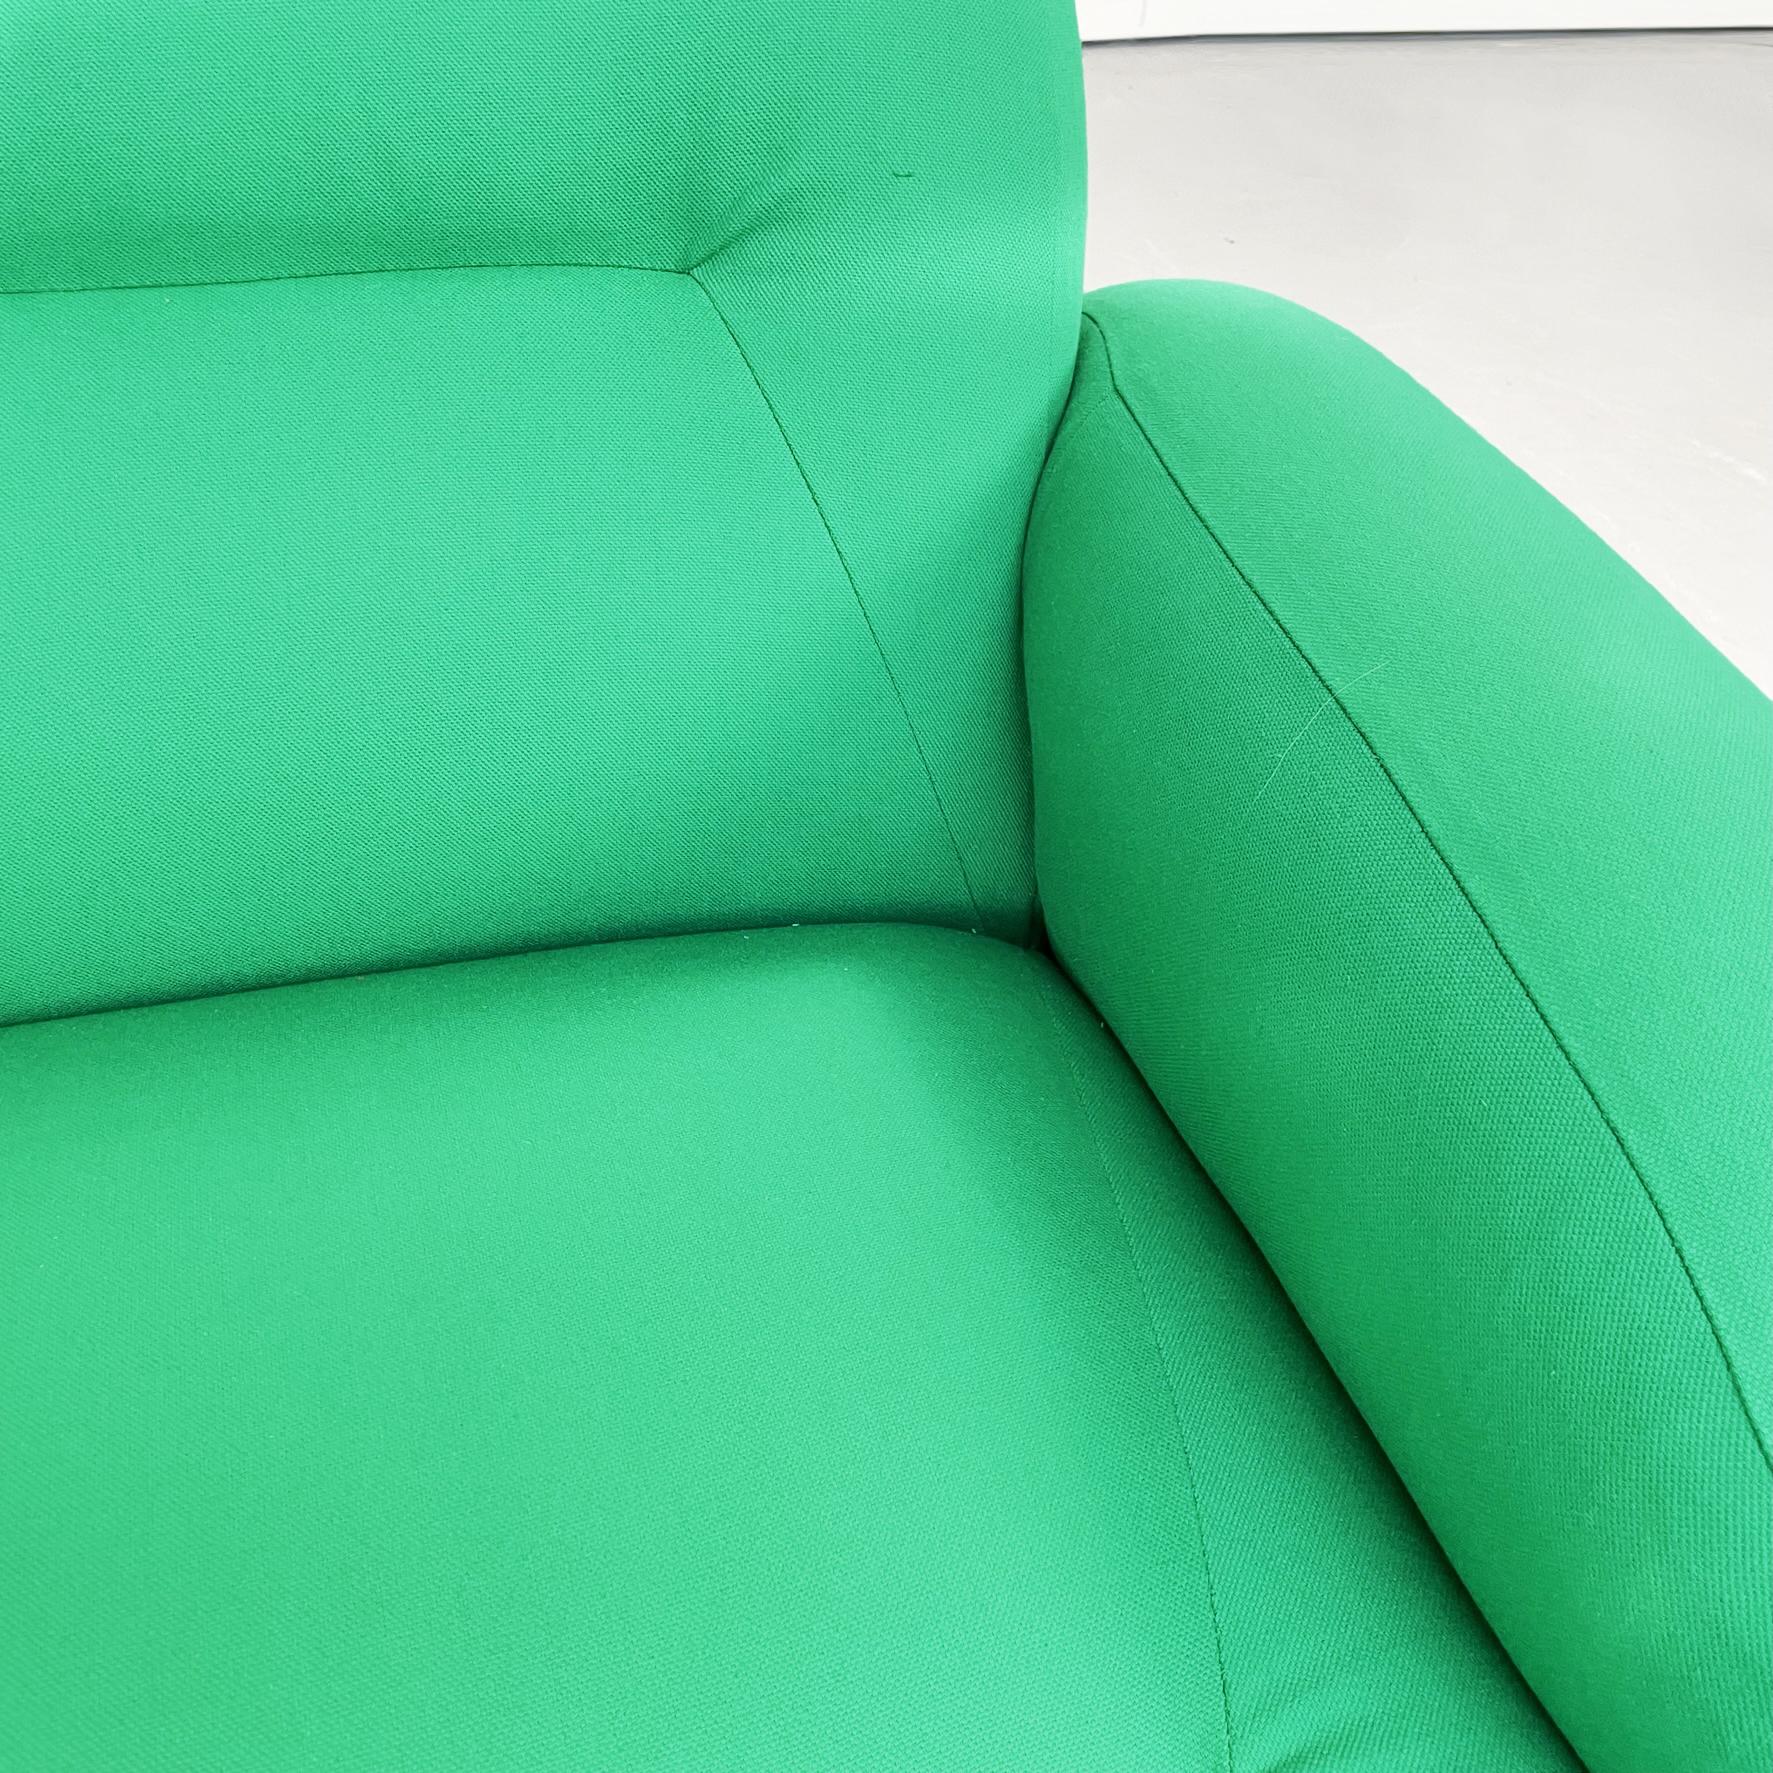 Italian Space Age Modular Sofa in Green Fabric with Metal Insert, 1970s For Sale 7